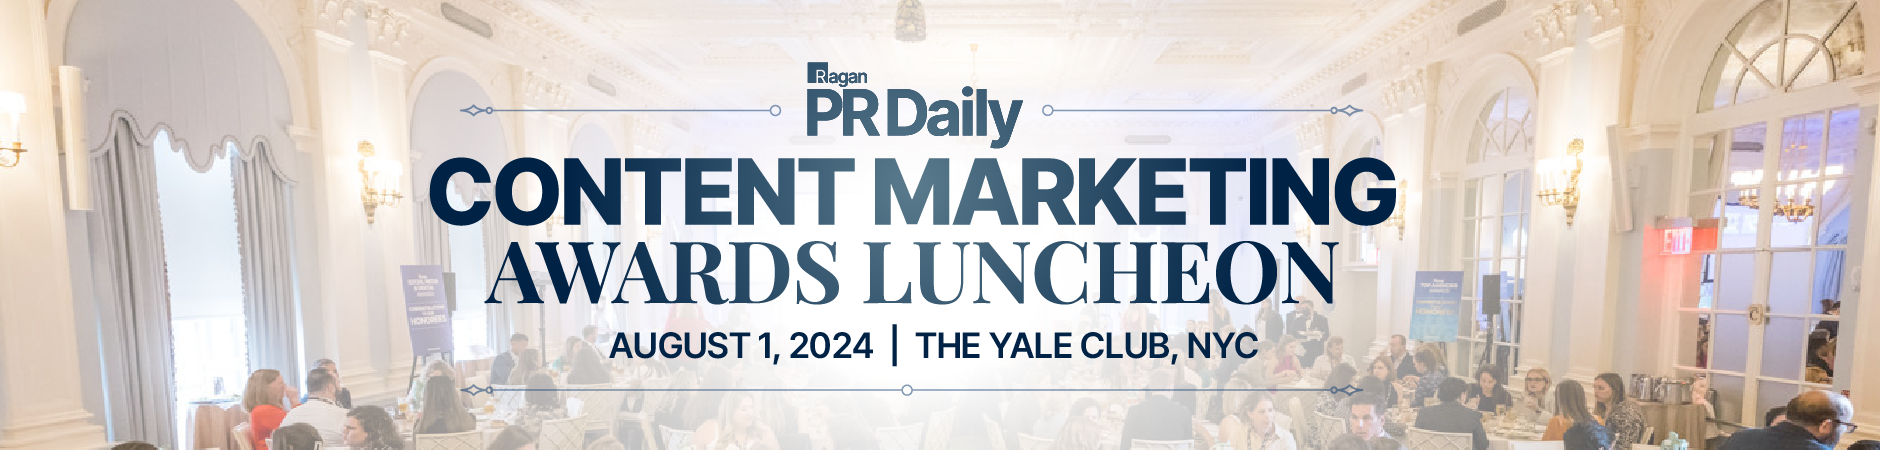 PR Daily Content Marketing Awards Luncheon 2024